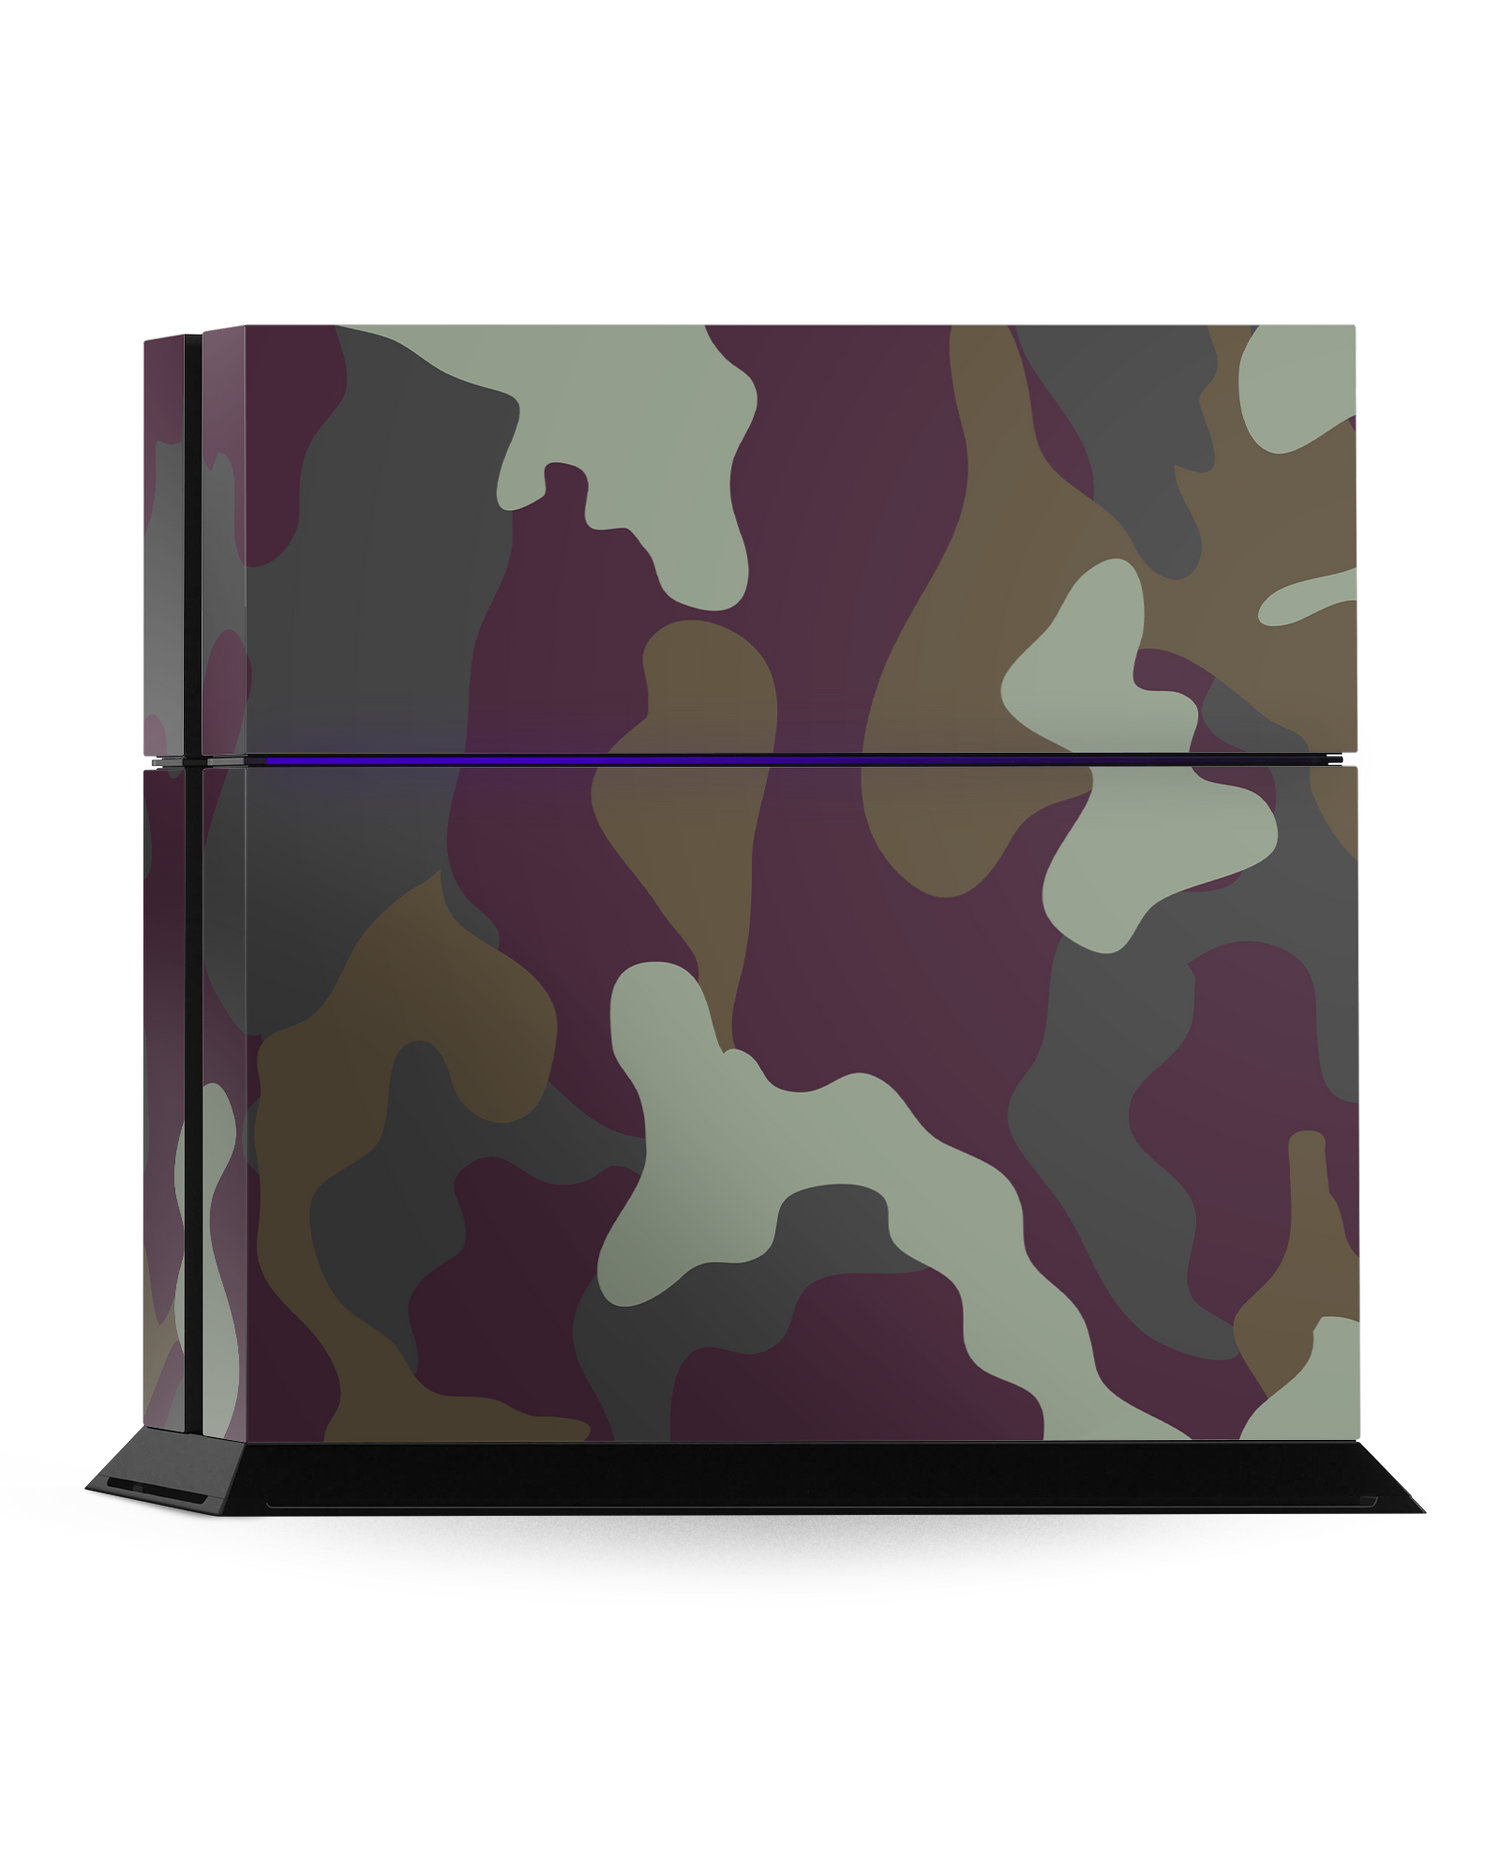 Night Camo Console Skin for Sony PlayStation 4: Standing